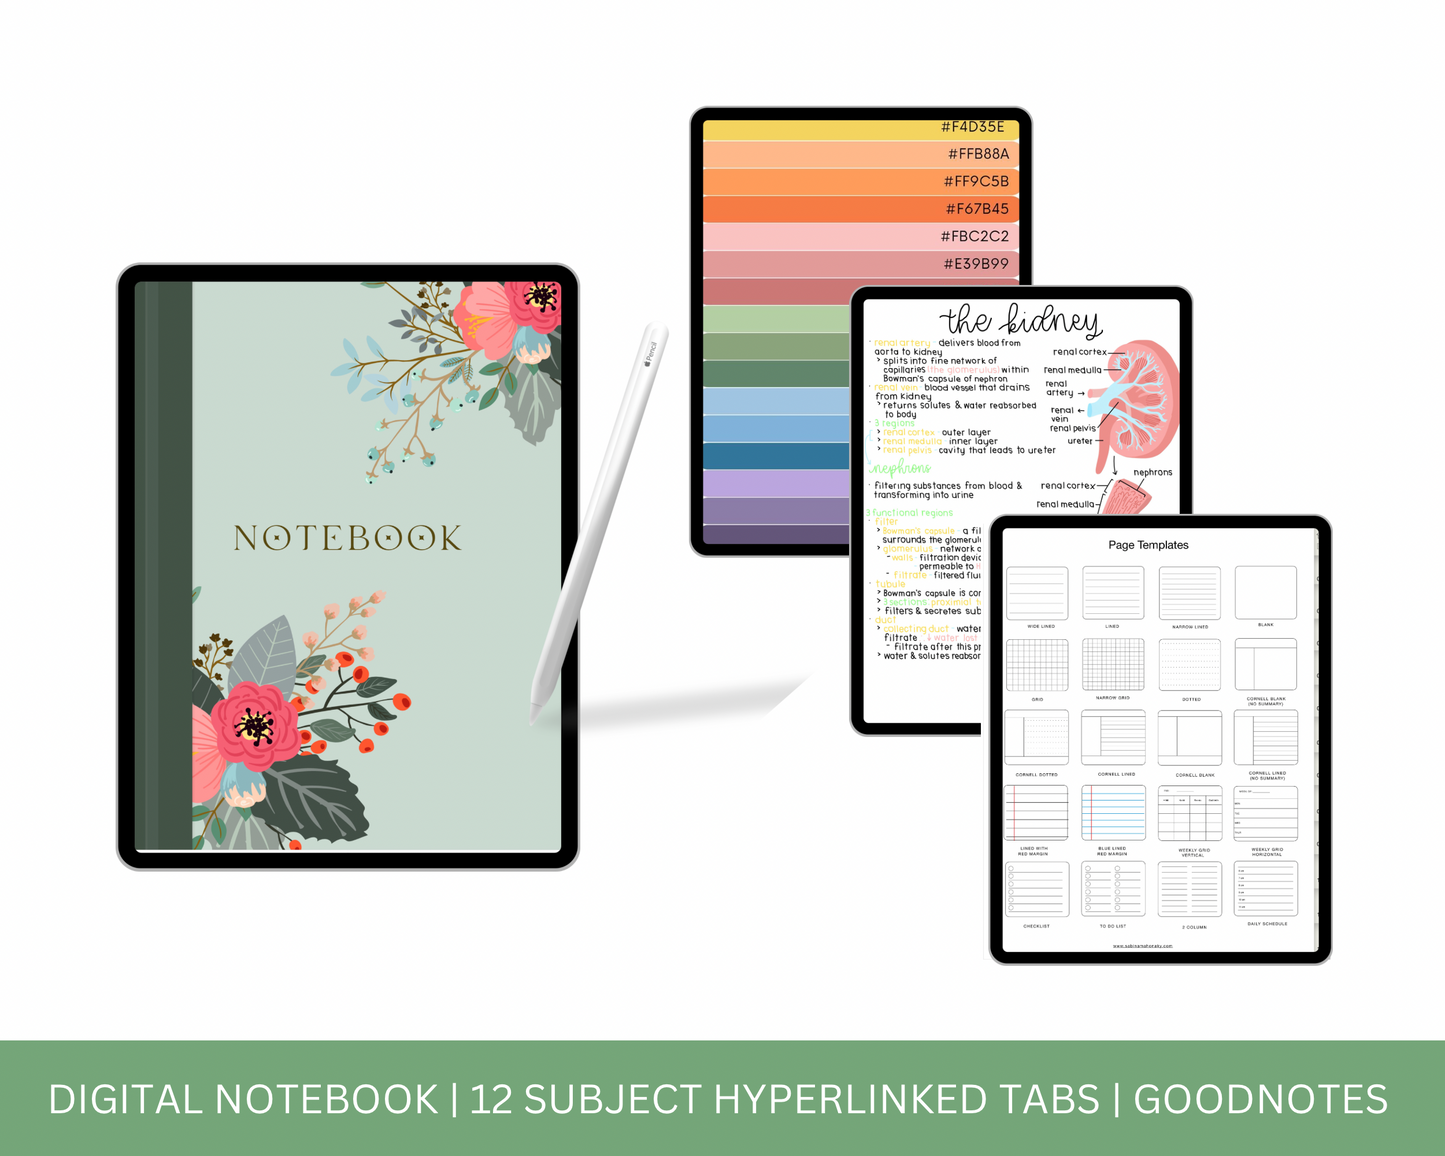 Digital Notebook , 12 Subject Hyperlinked Tabs, Note Page Templates, Notebook Template, GoodNotes